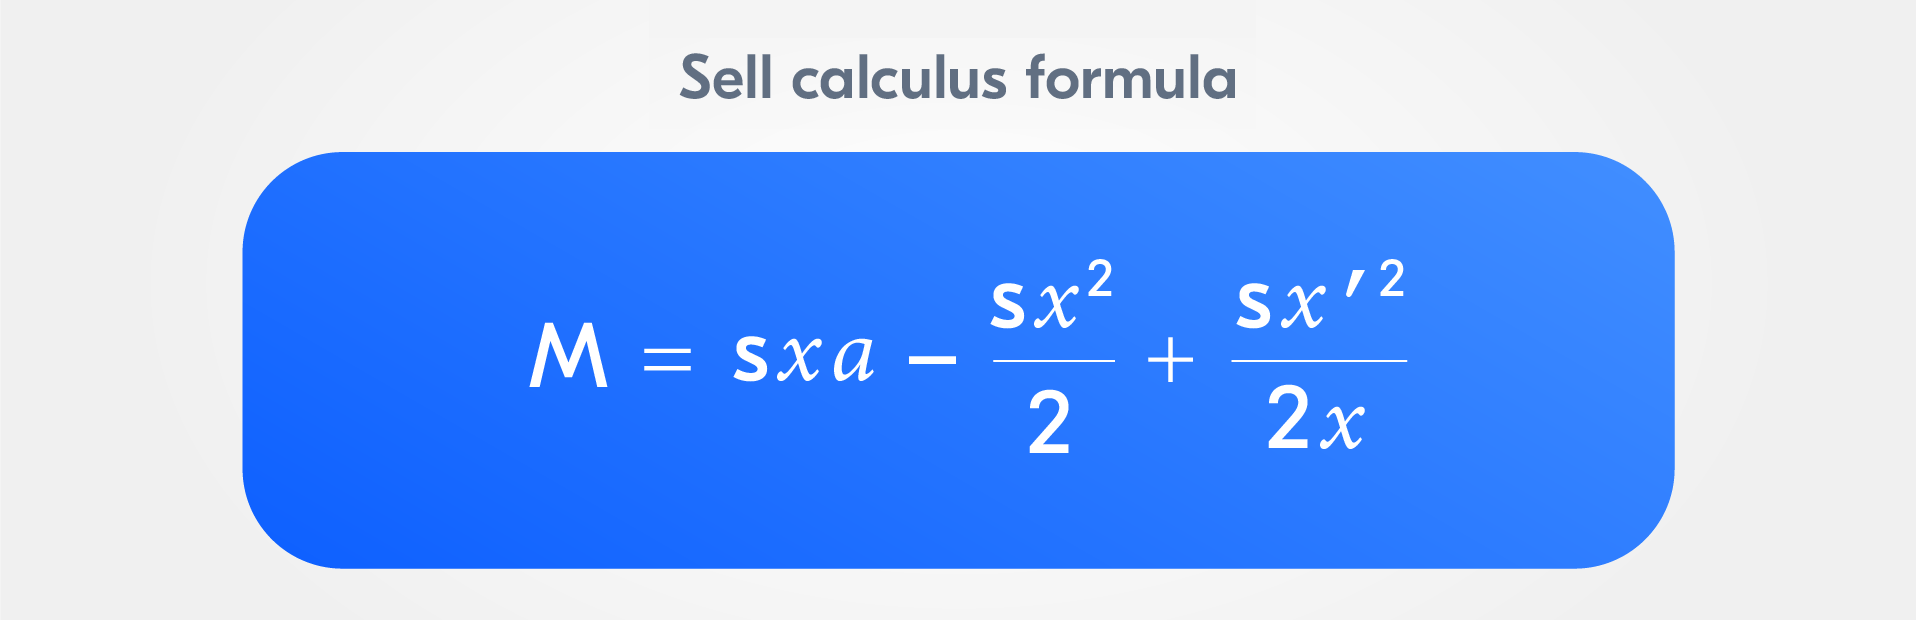 Formula to calculate the pay amount